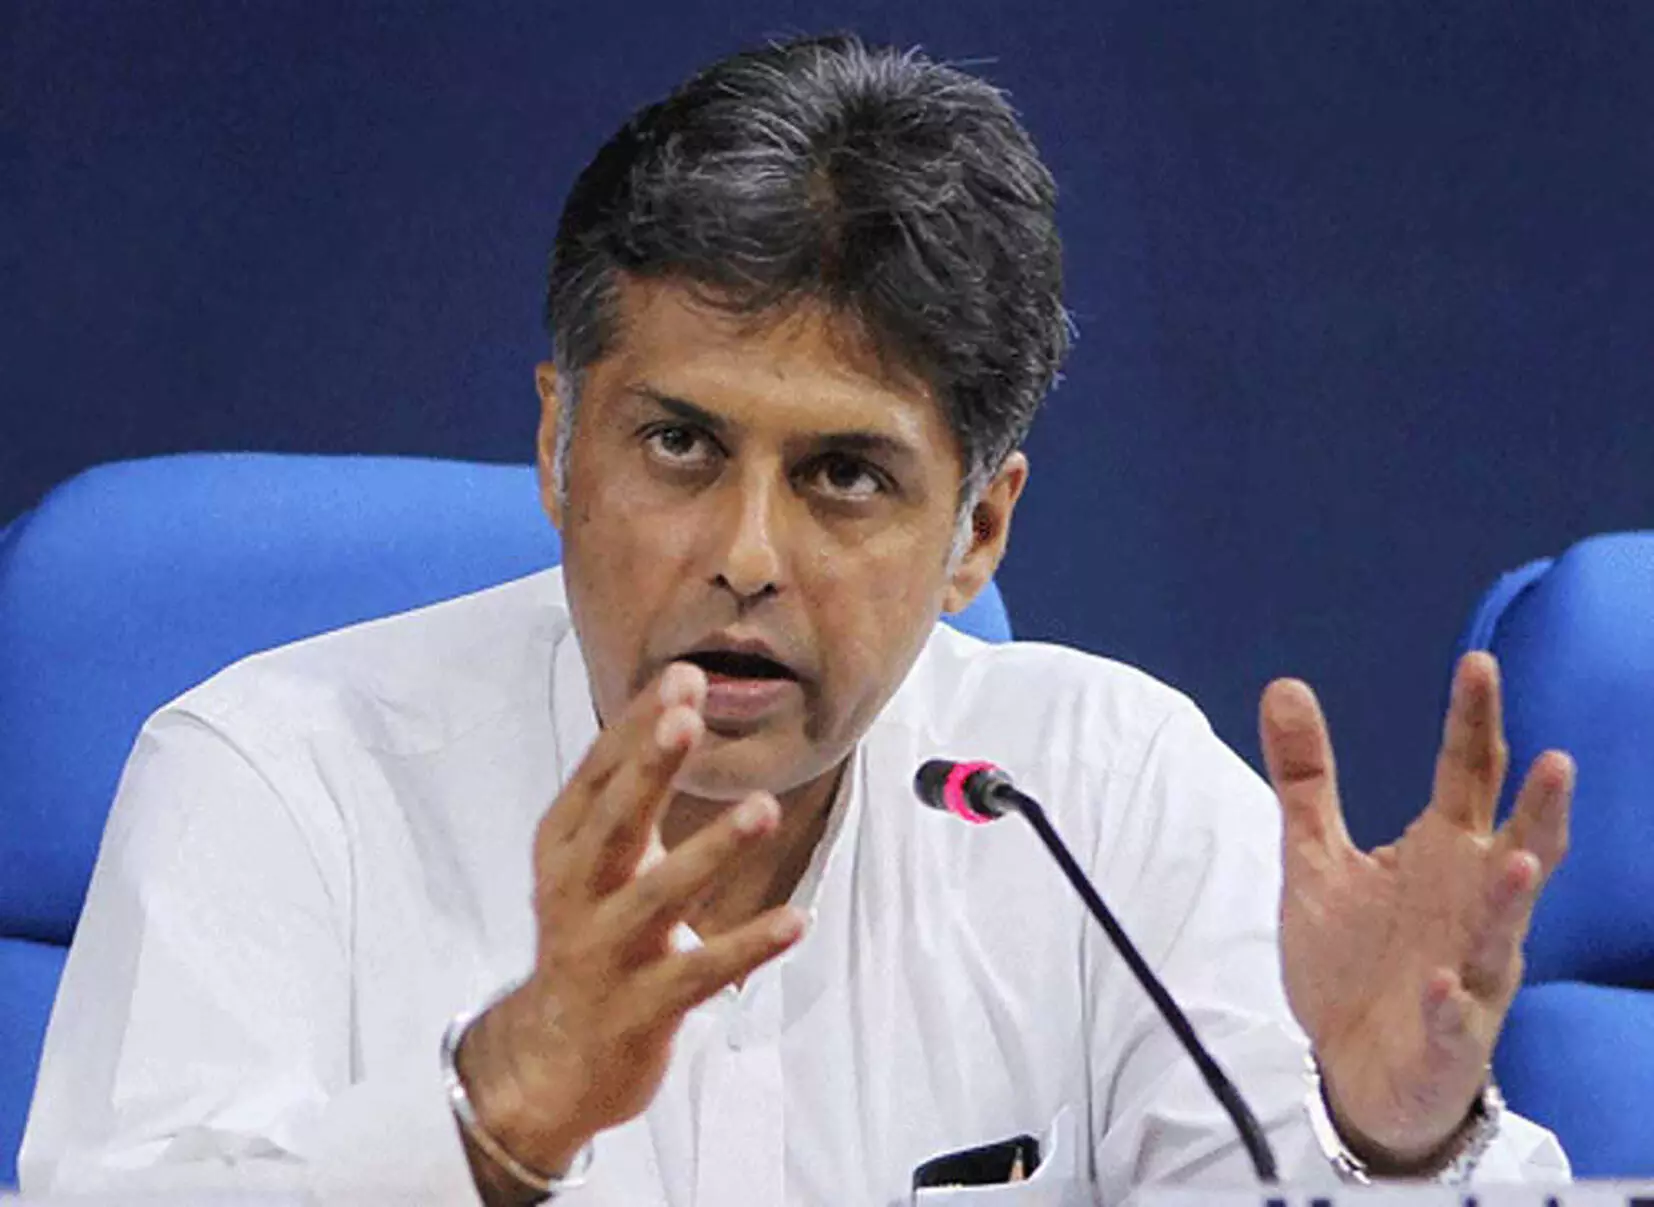 All bills passed after admission of no-trust motion constitutionally suspect claims Congress Manish Tewari